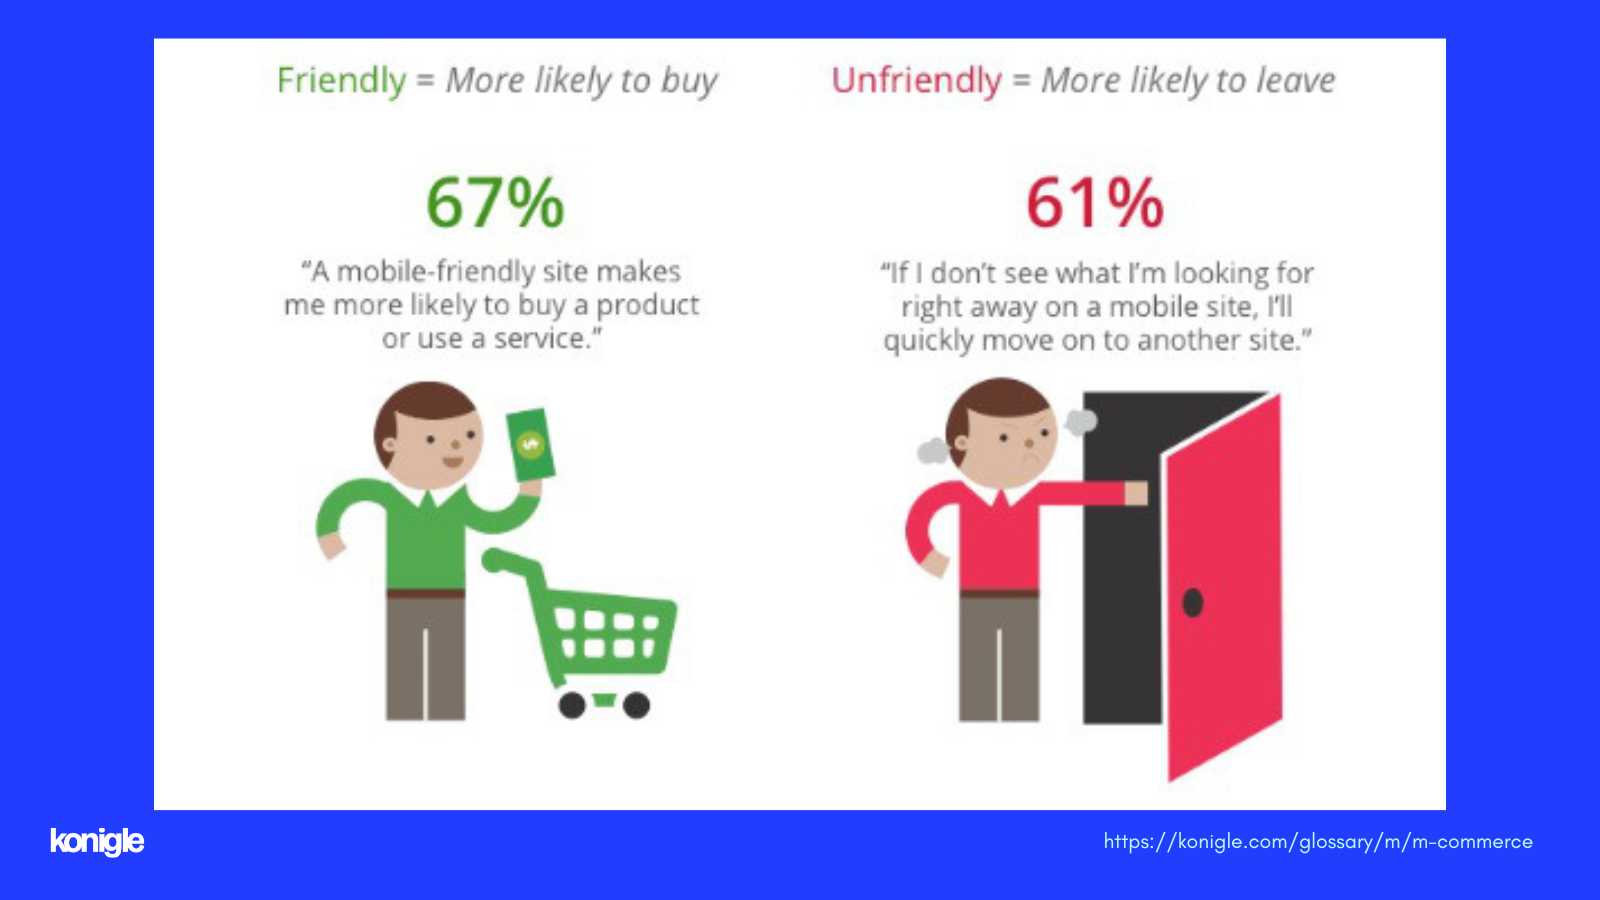 The mobile-friendly site makes users more likely to buy a product